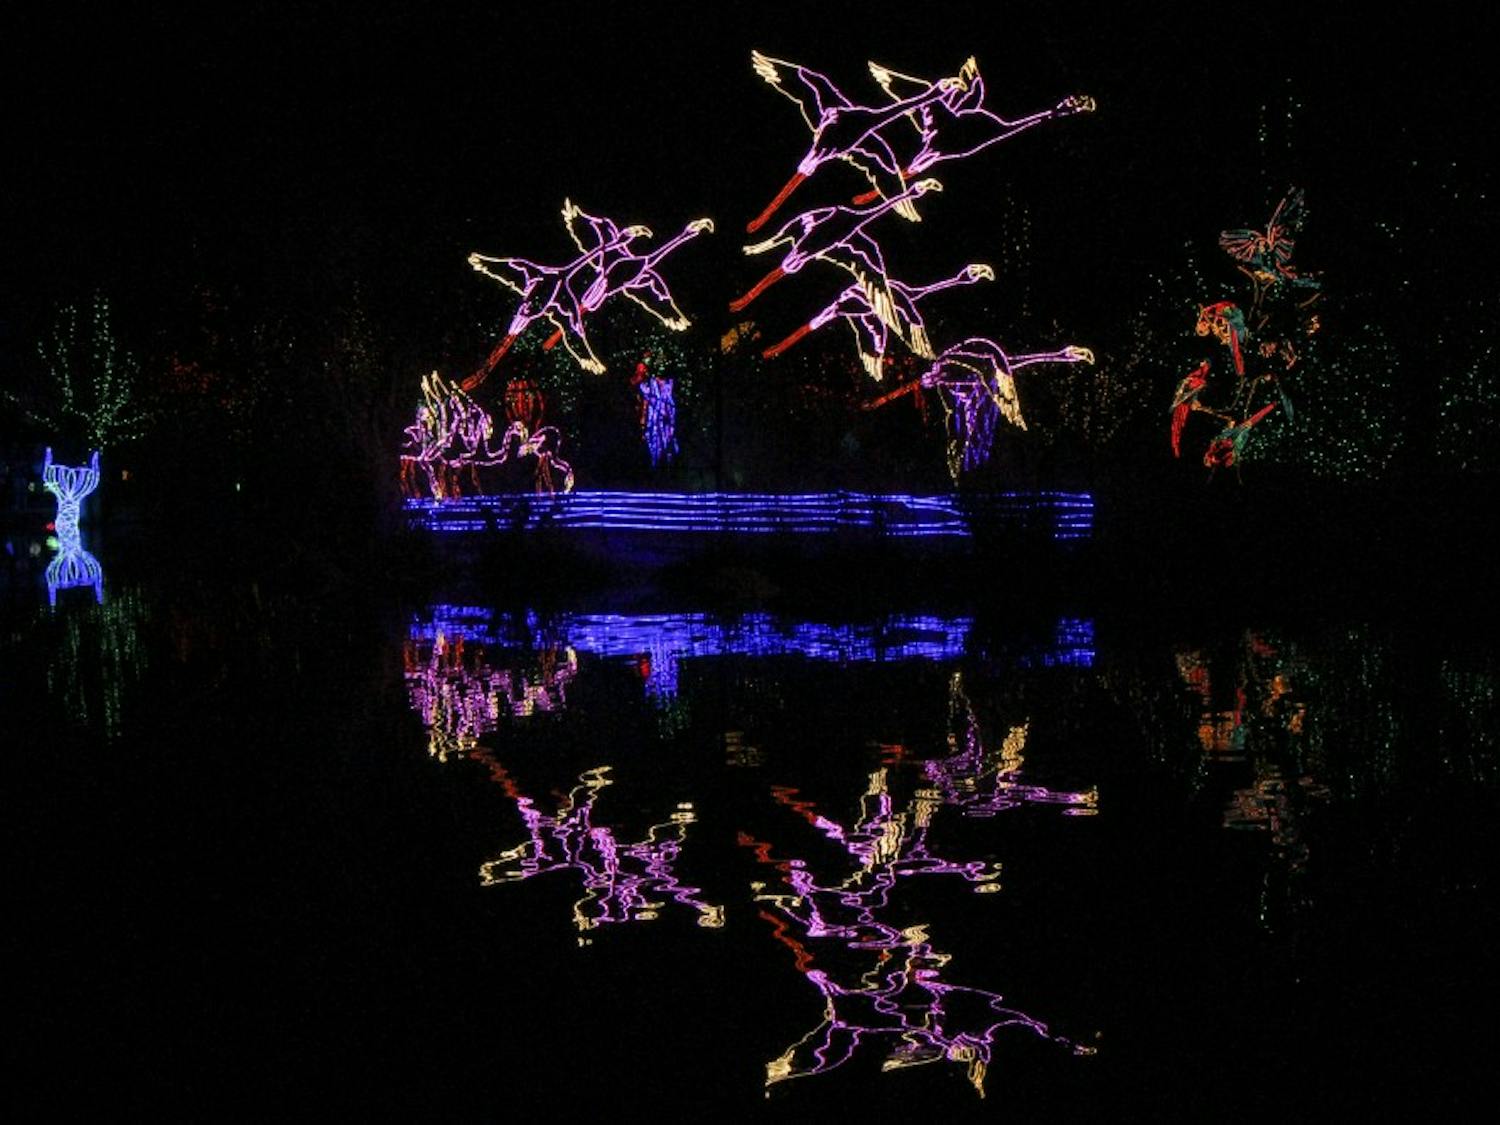 Lights form a group of cranes flying away being reflected in the parks pond.